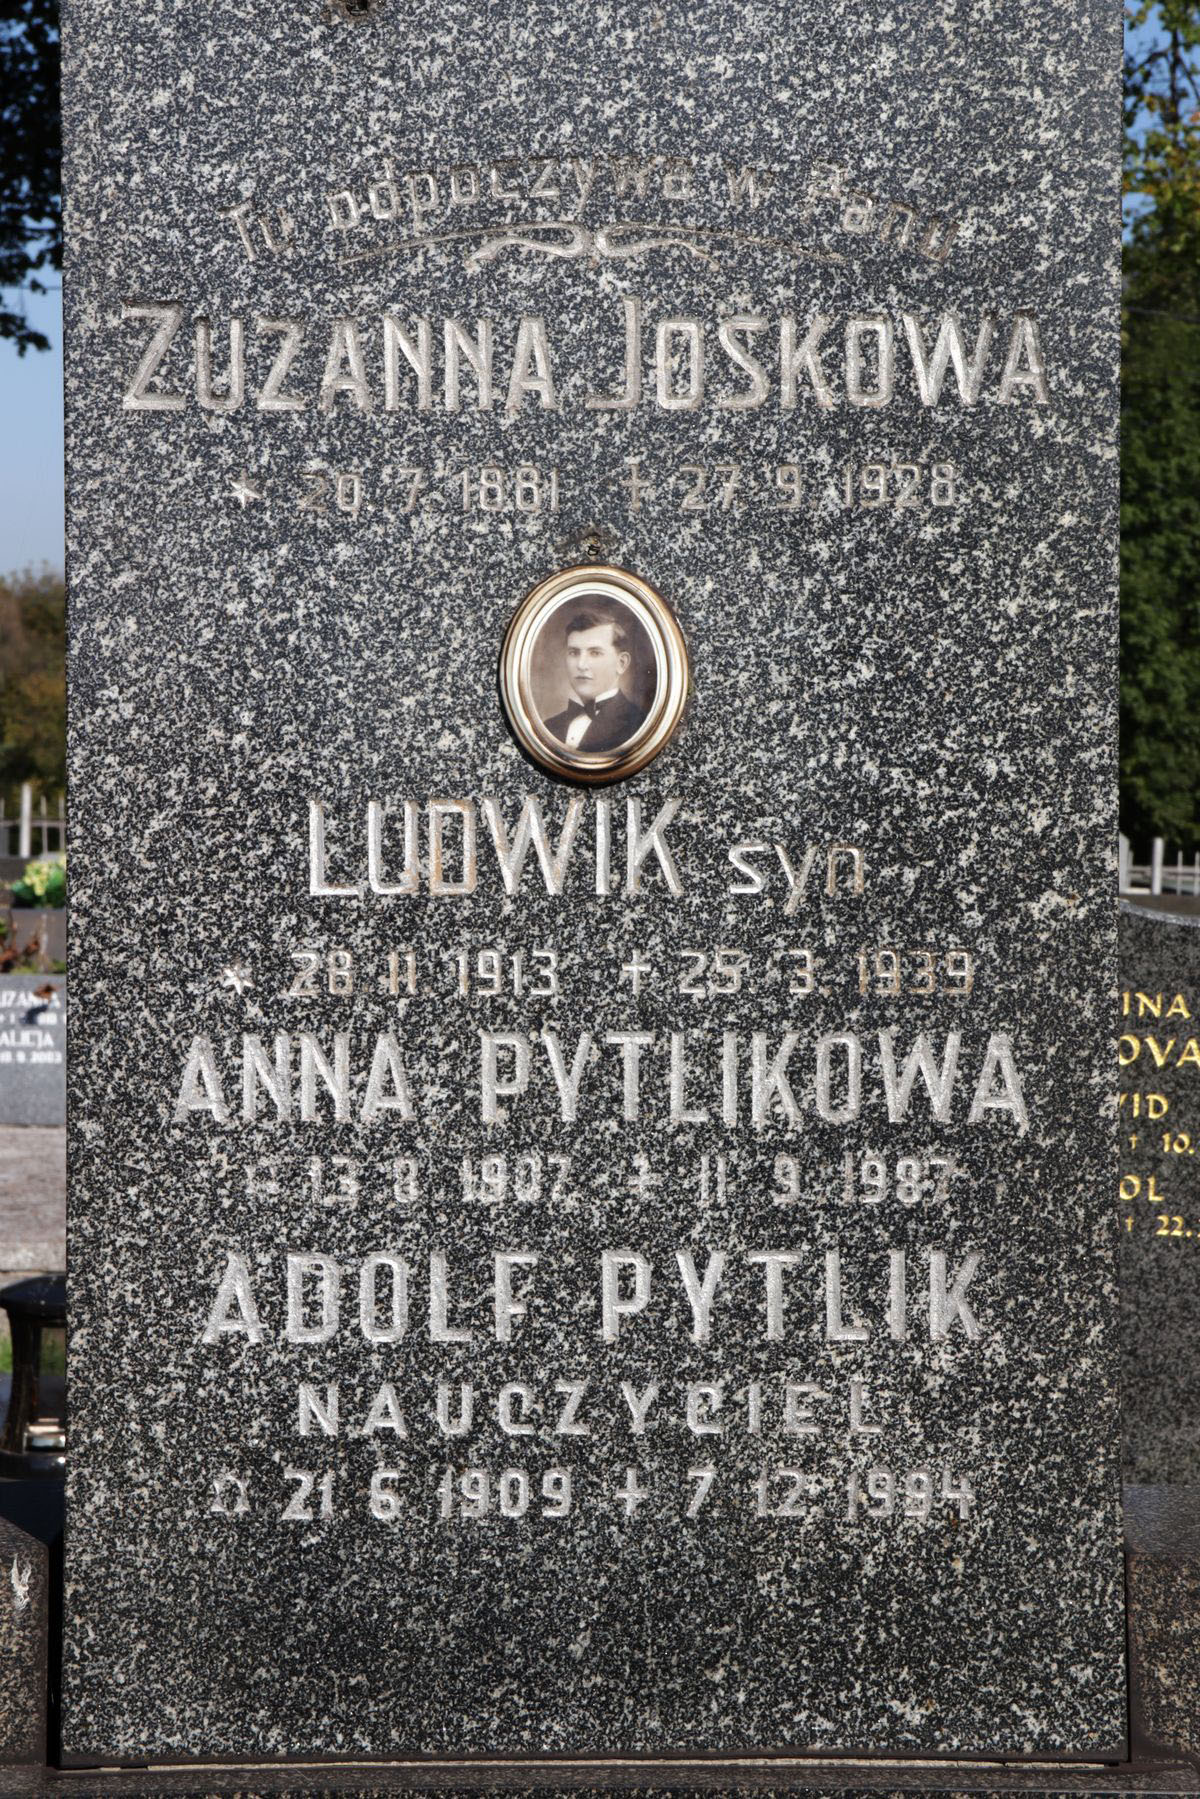 Inscription from the tombstone of Zuzanna and Ludwik Joskowych, Anna and Adolf Pytlik, Sibitsa cemetery